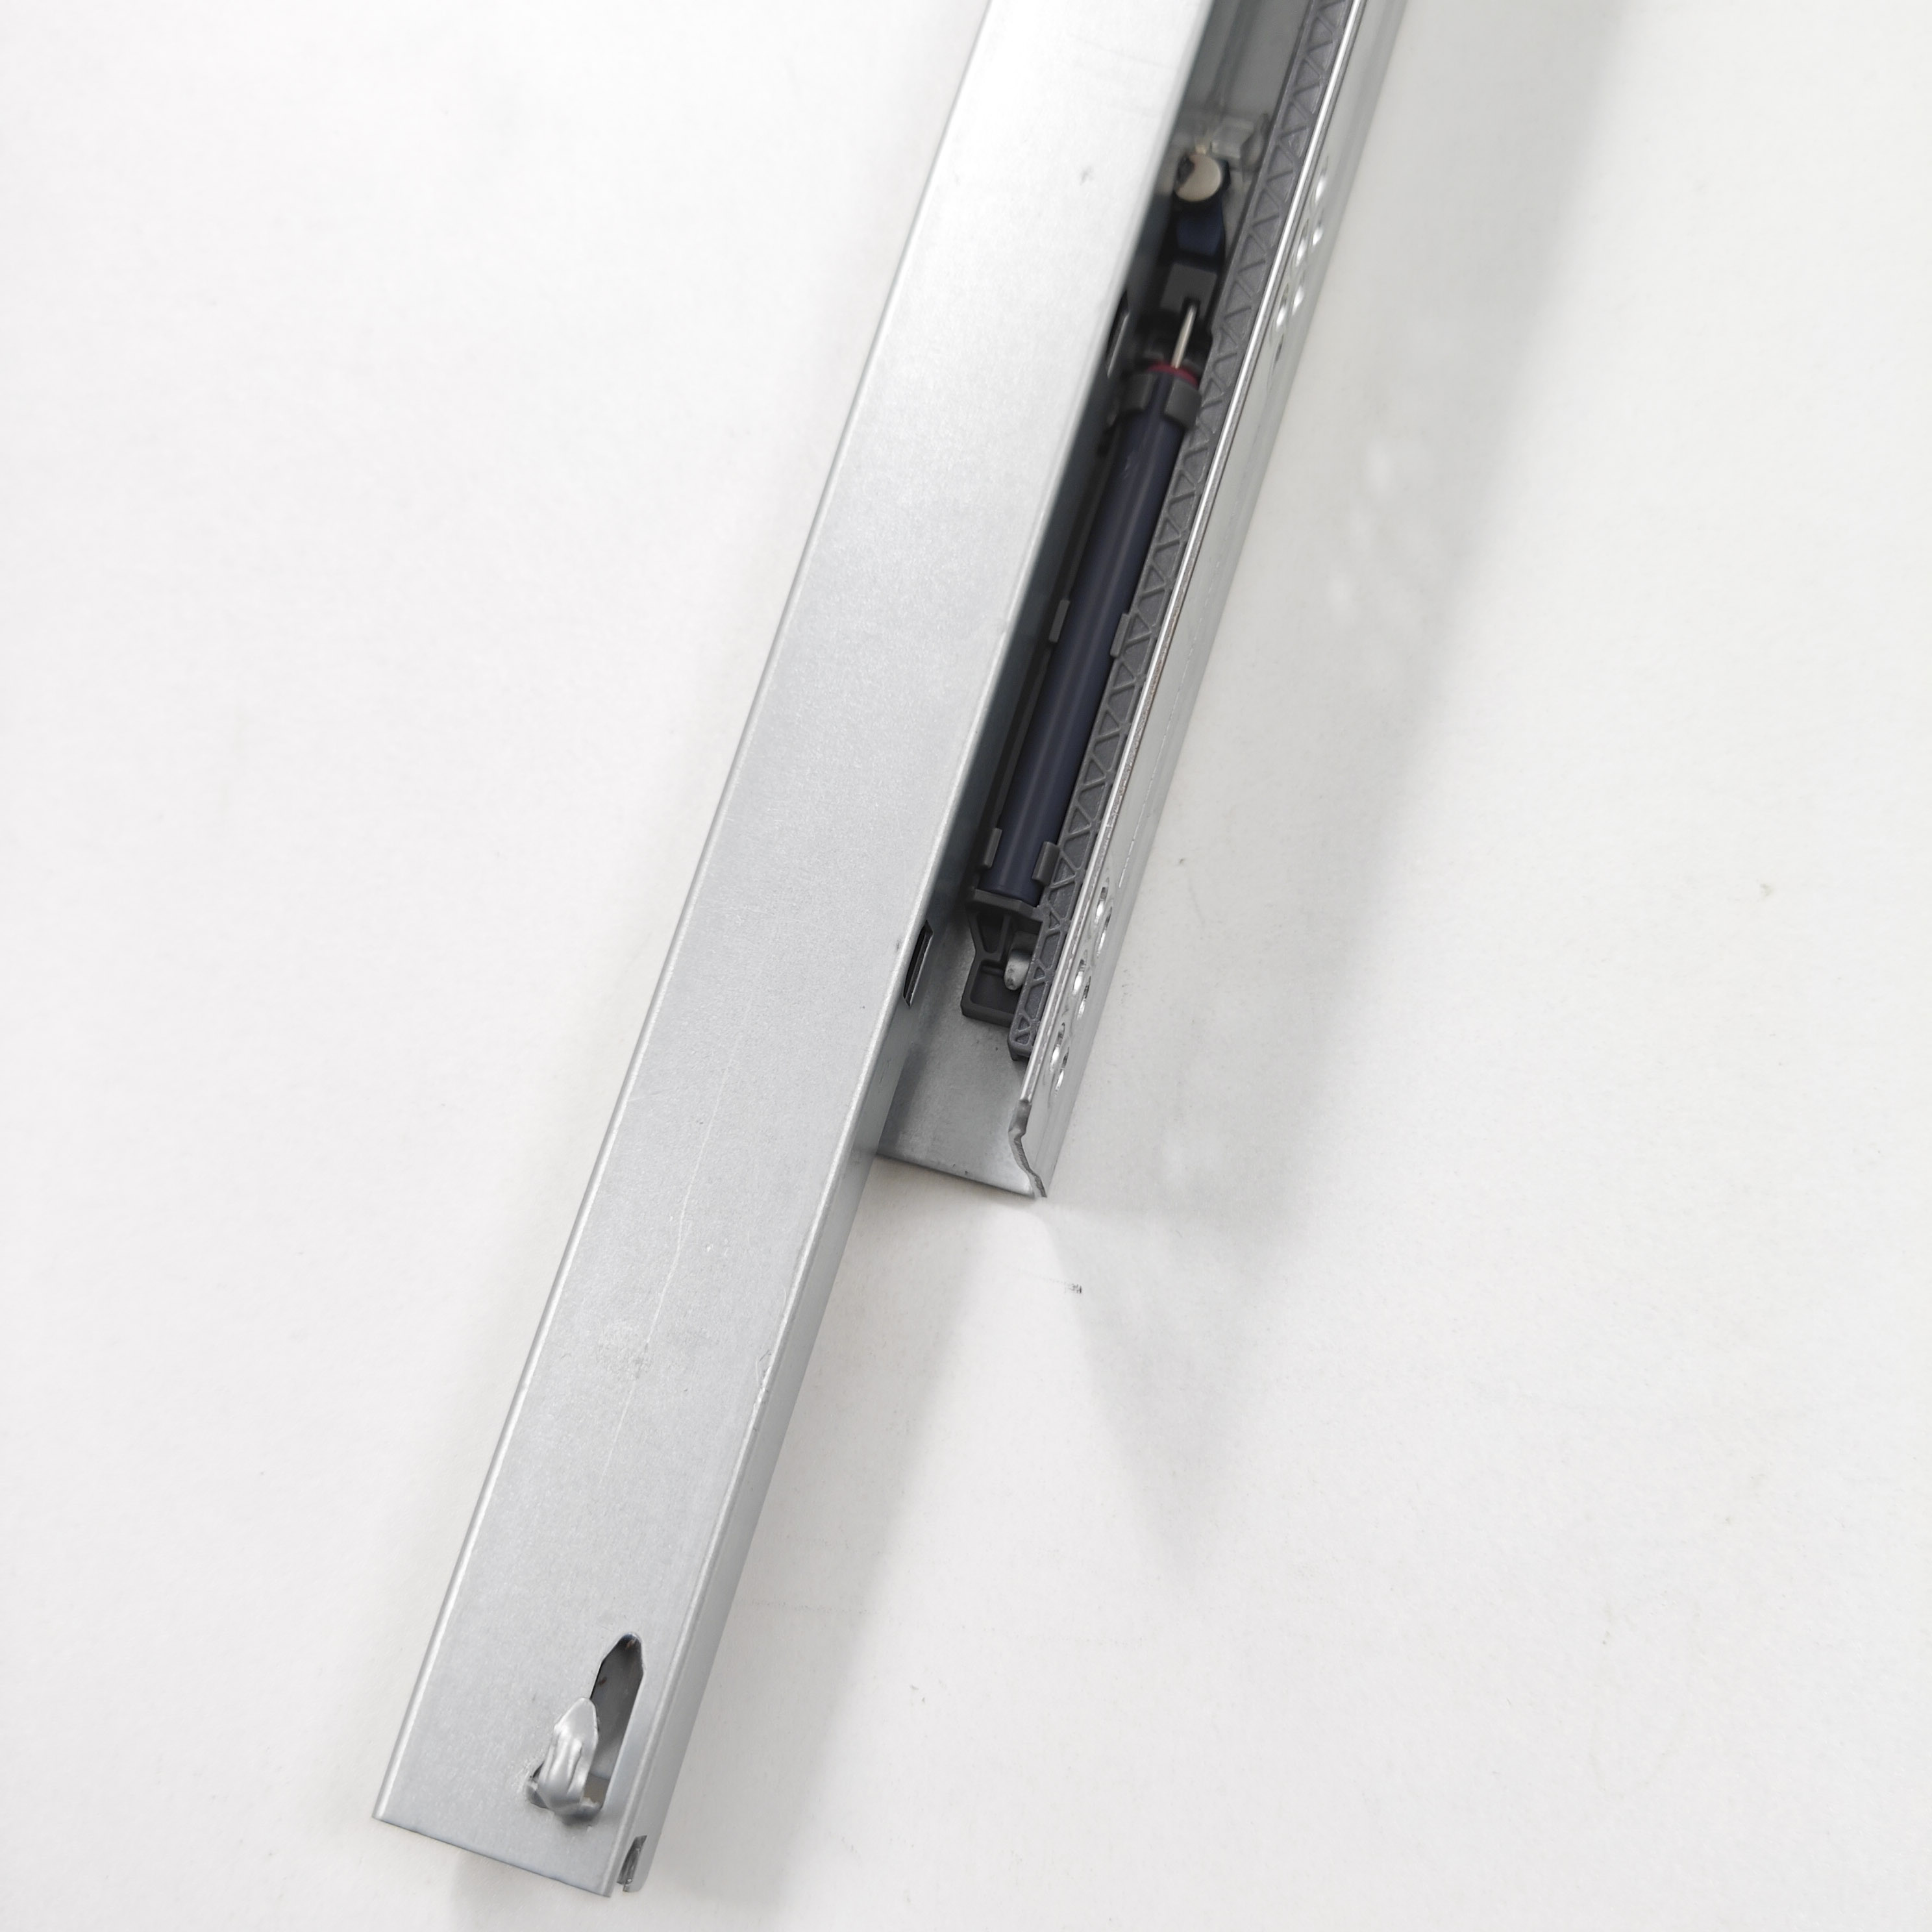 Heavy Duty 3 Fold Full Extension Drawer Slide Rail 300 Mm Length With/without Locking Function